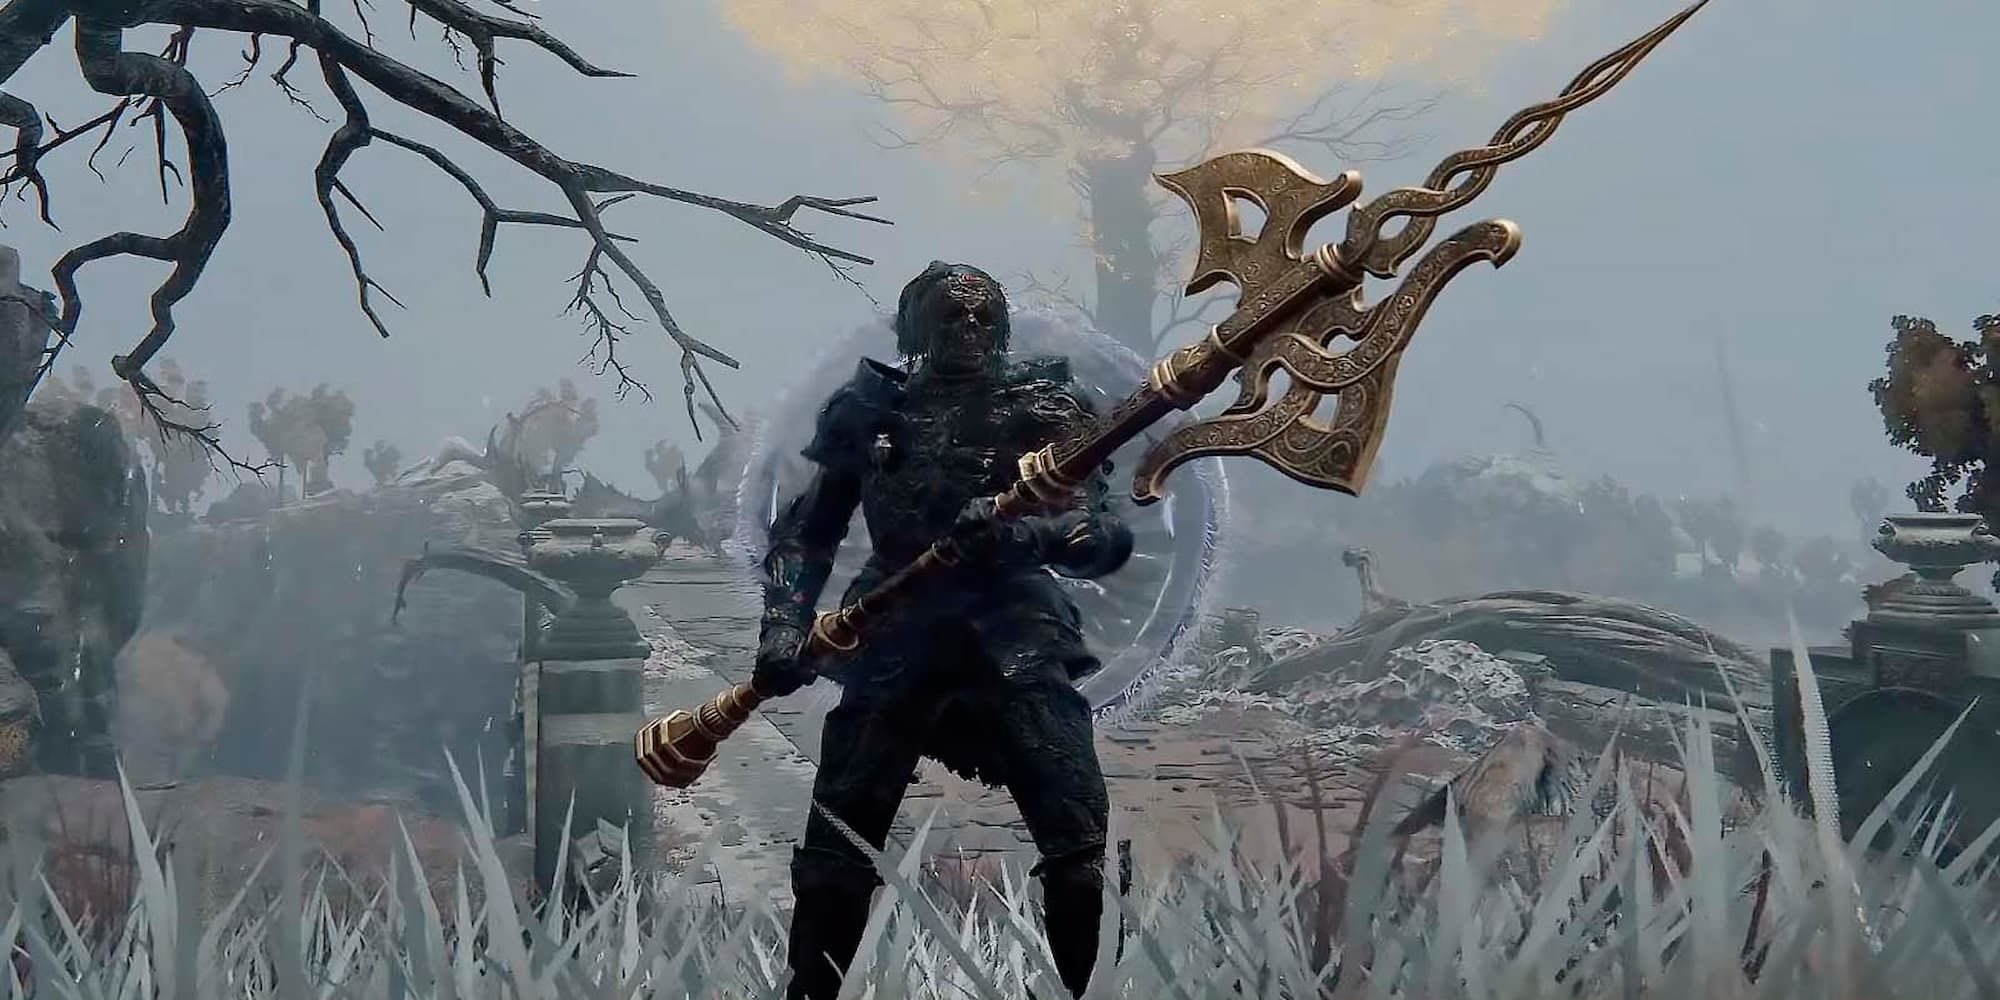 Player Holding The Golden Halberd Two-Handed